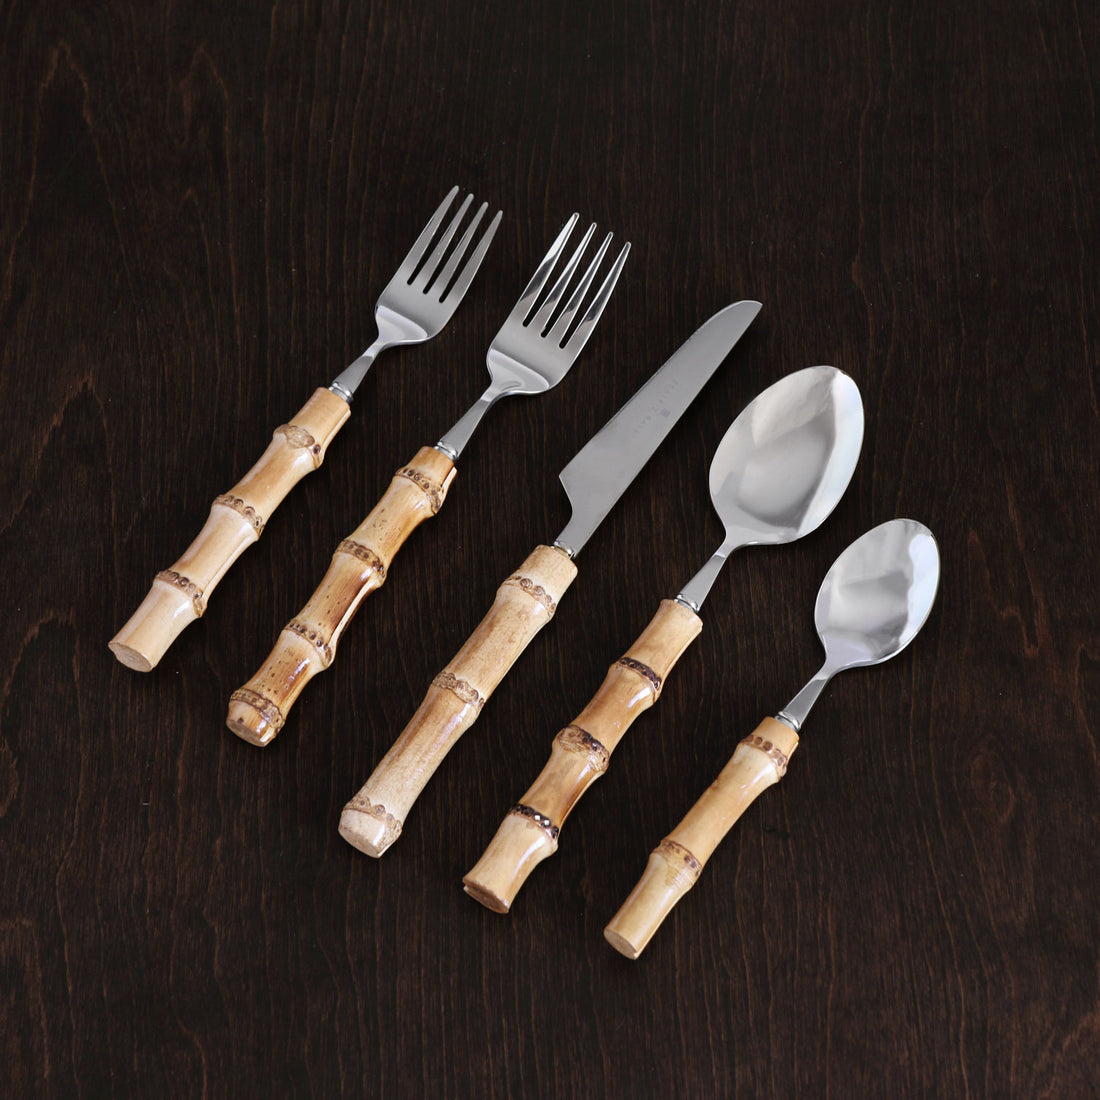 VIDA Bamboo Stainless Flatware II Set of 5 (Silver and Natural)